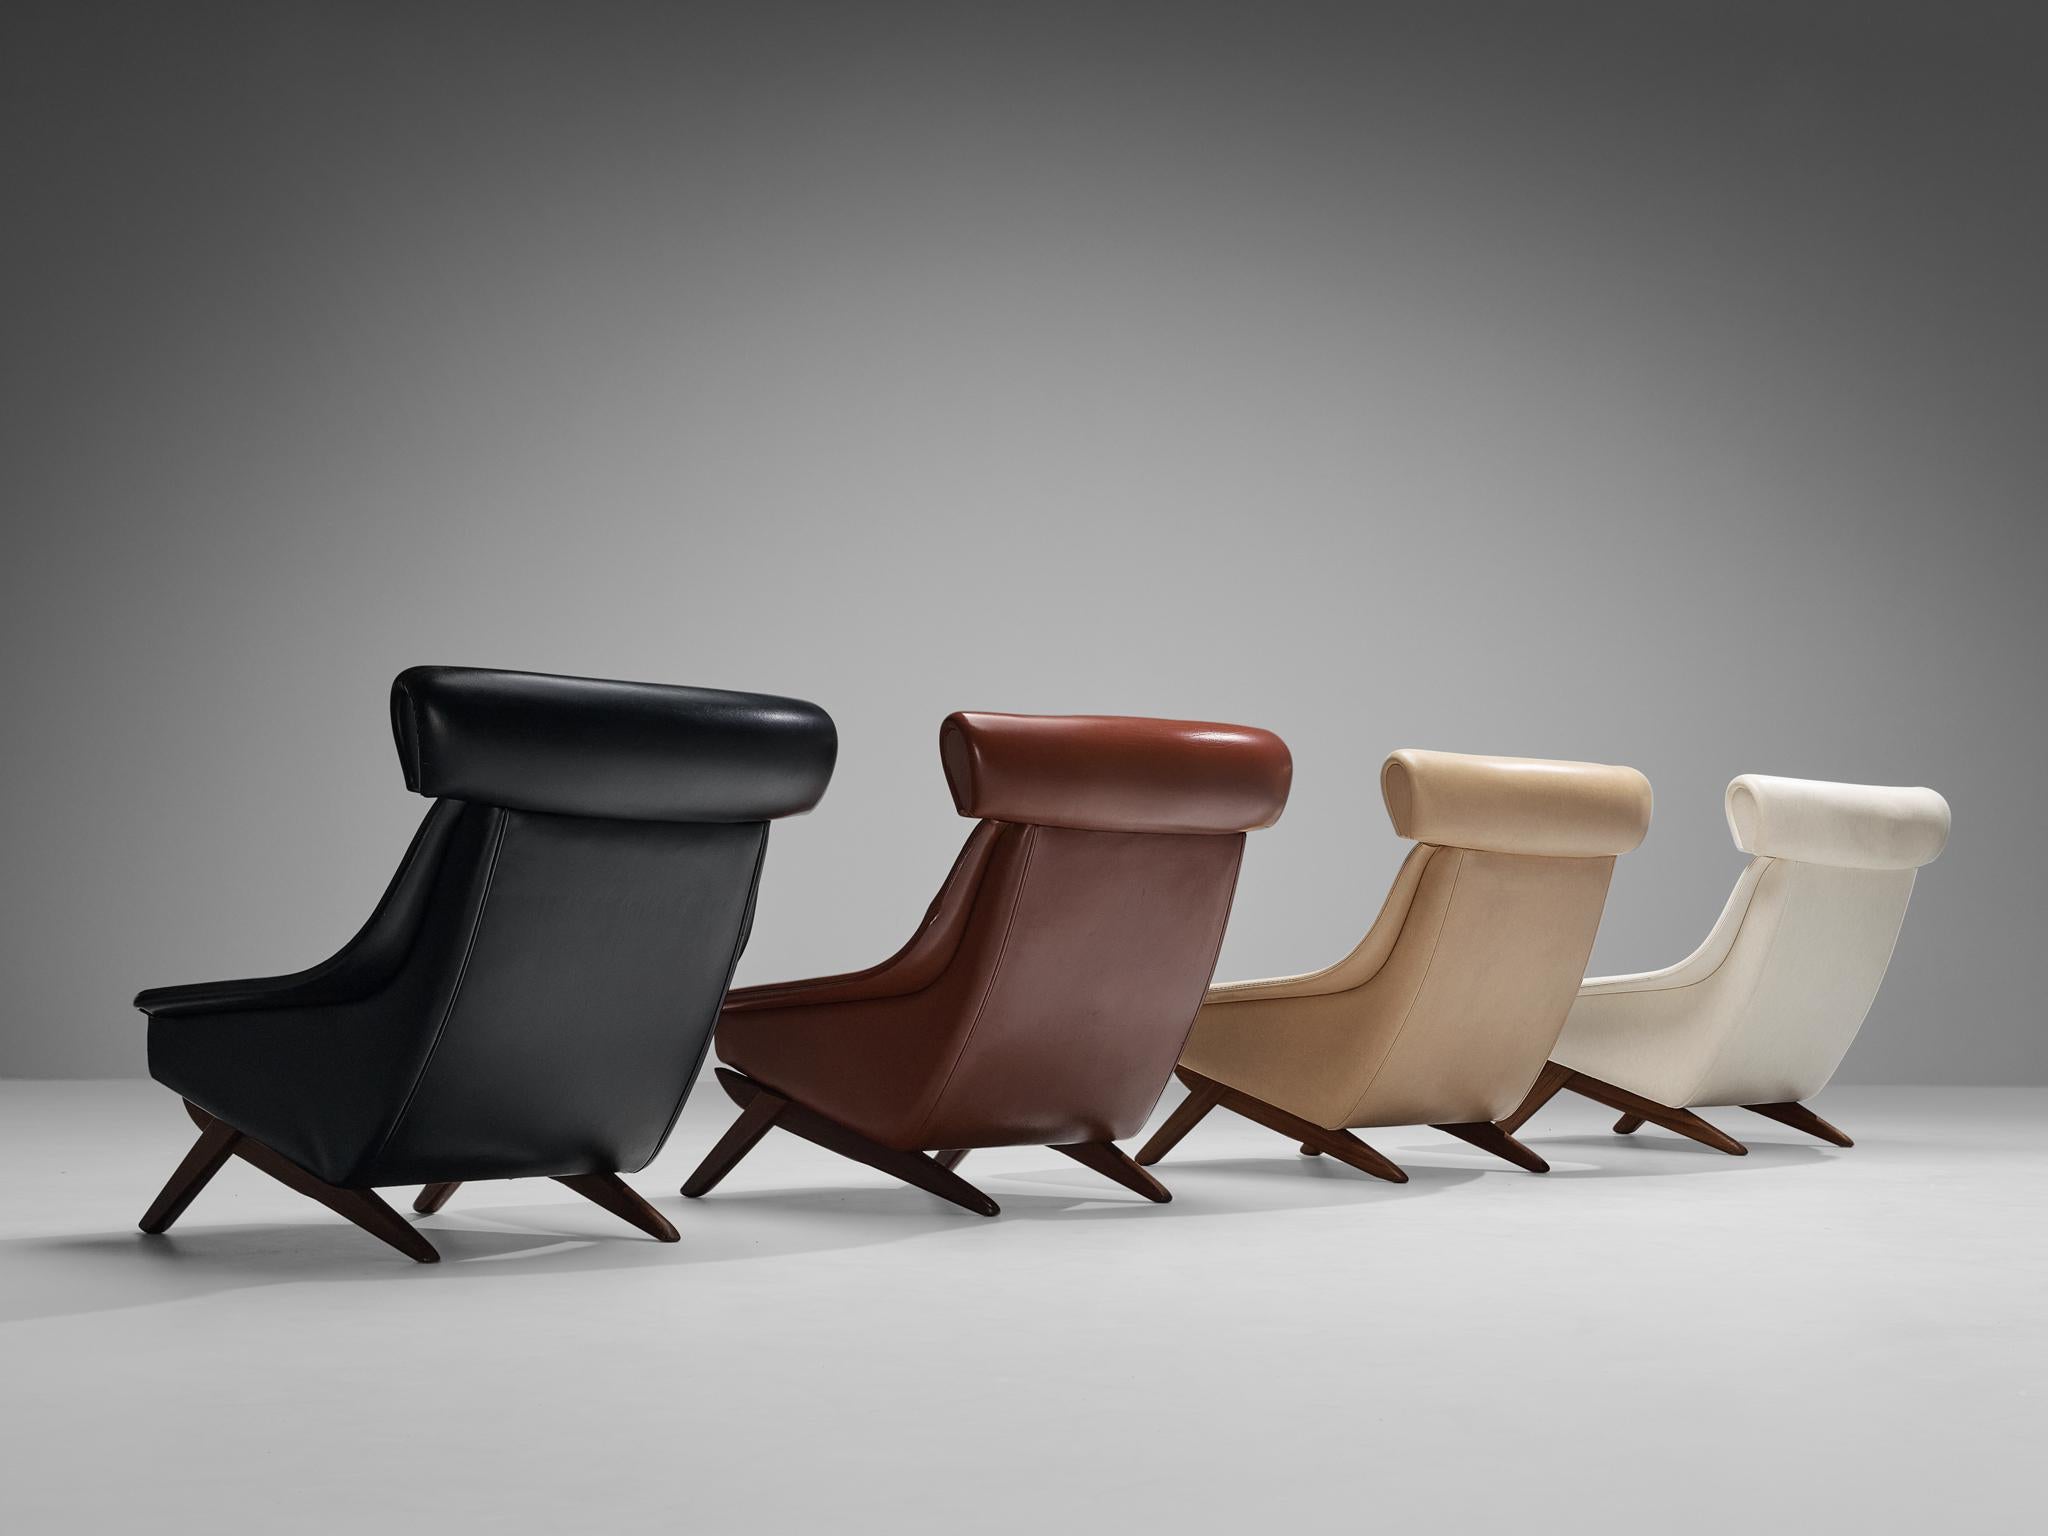 Illum Wikkelsø, lounge chairs, leatherette, teak, Denmark, 1960s.

Well-designed easy chairs in the colors pearlescent white, beige, black, and red leatherette upholstery by Danish designer Illum Wikkelsø. This 'Ox Chair' shows some interesting